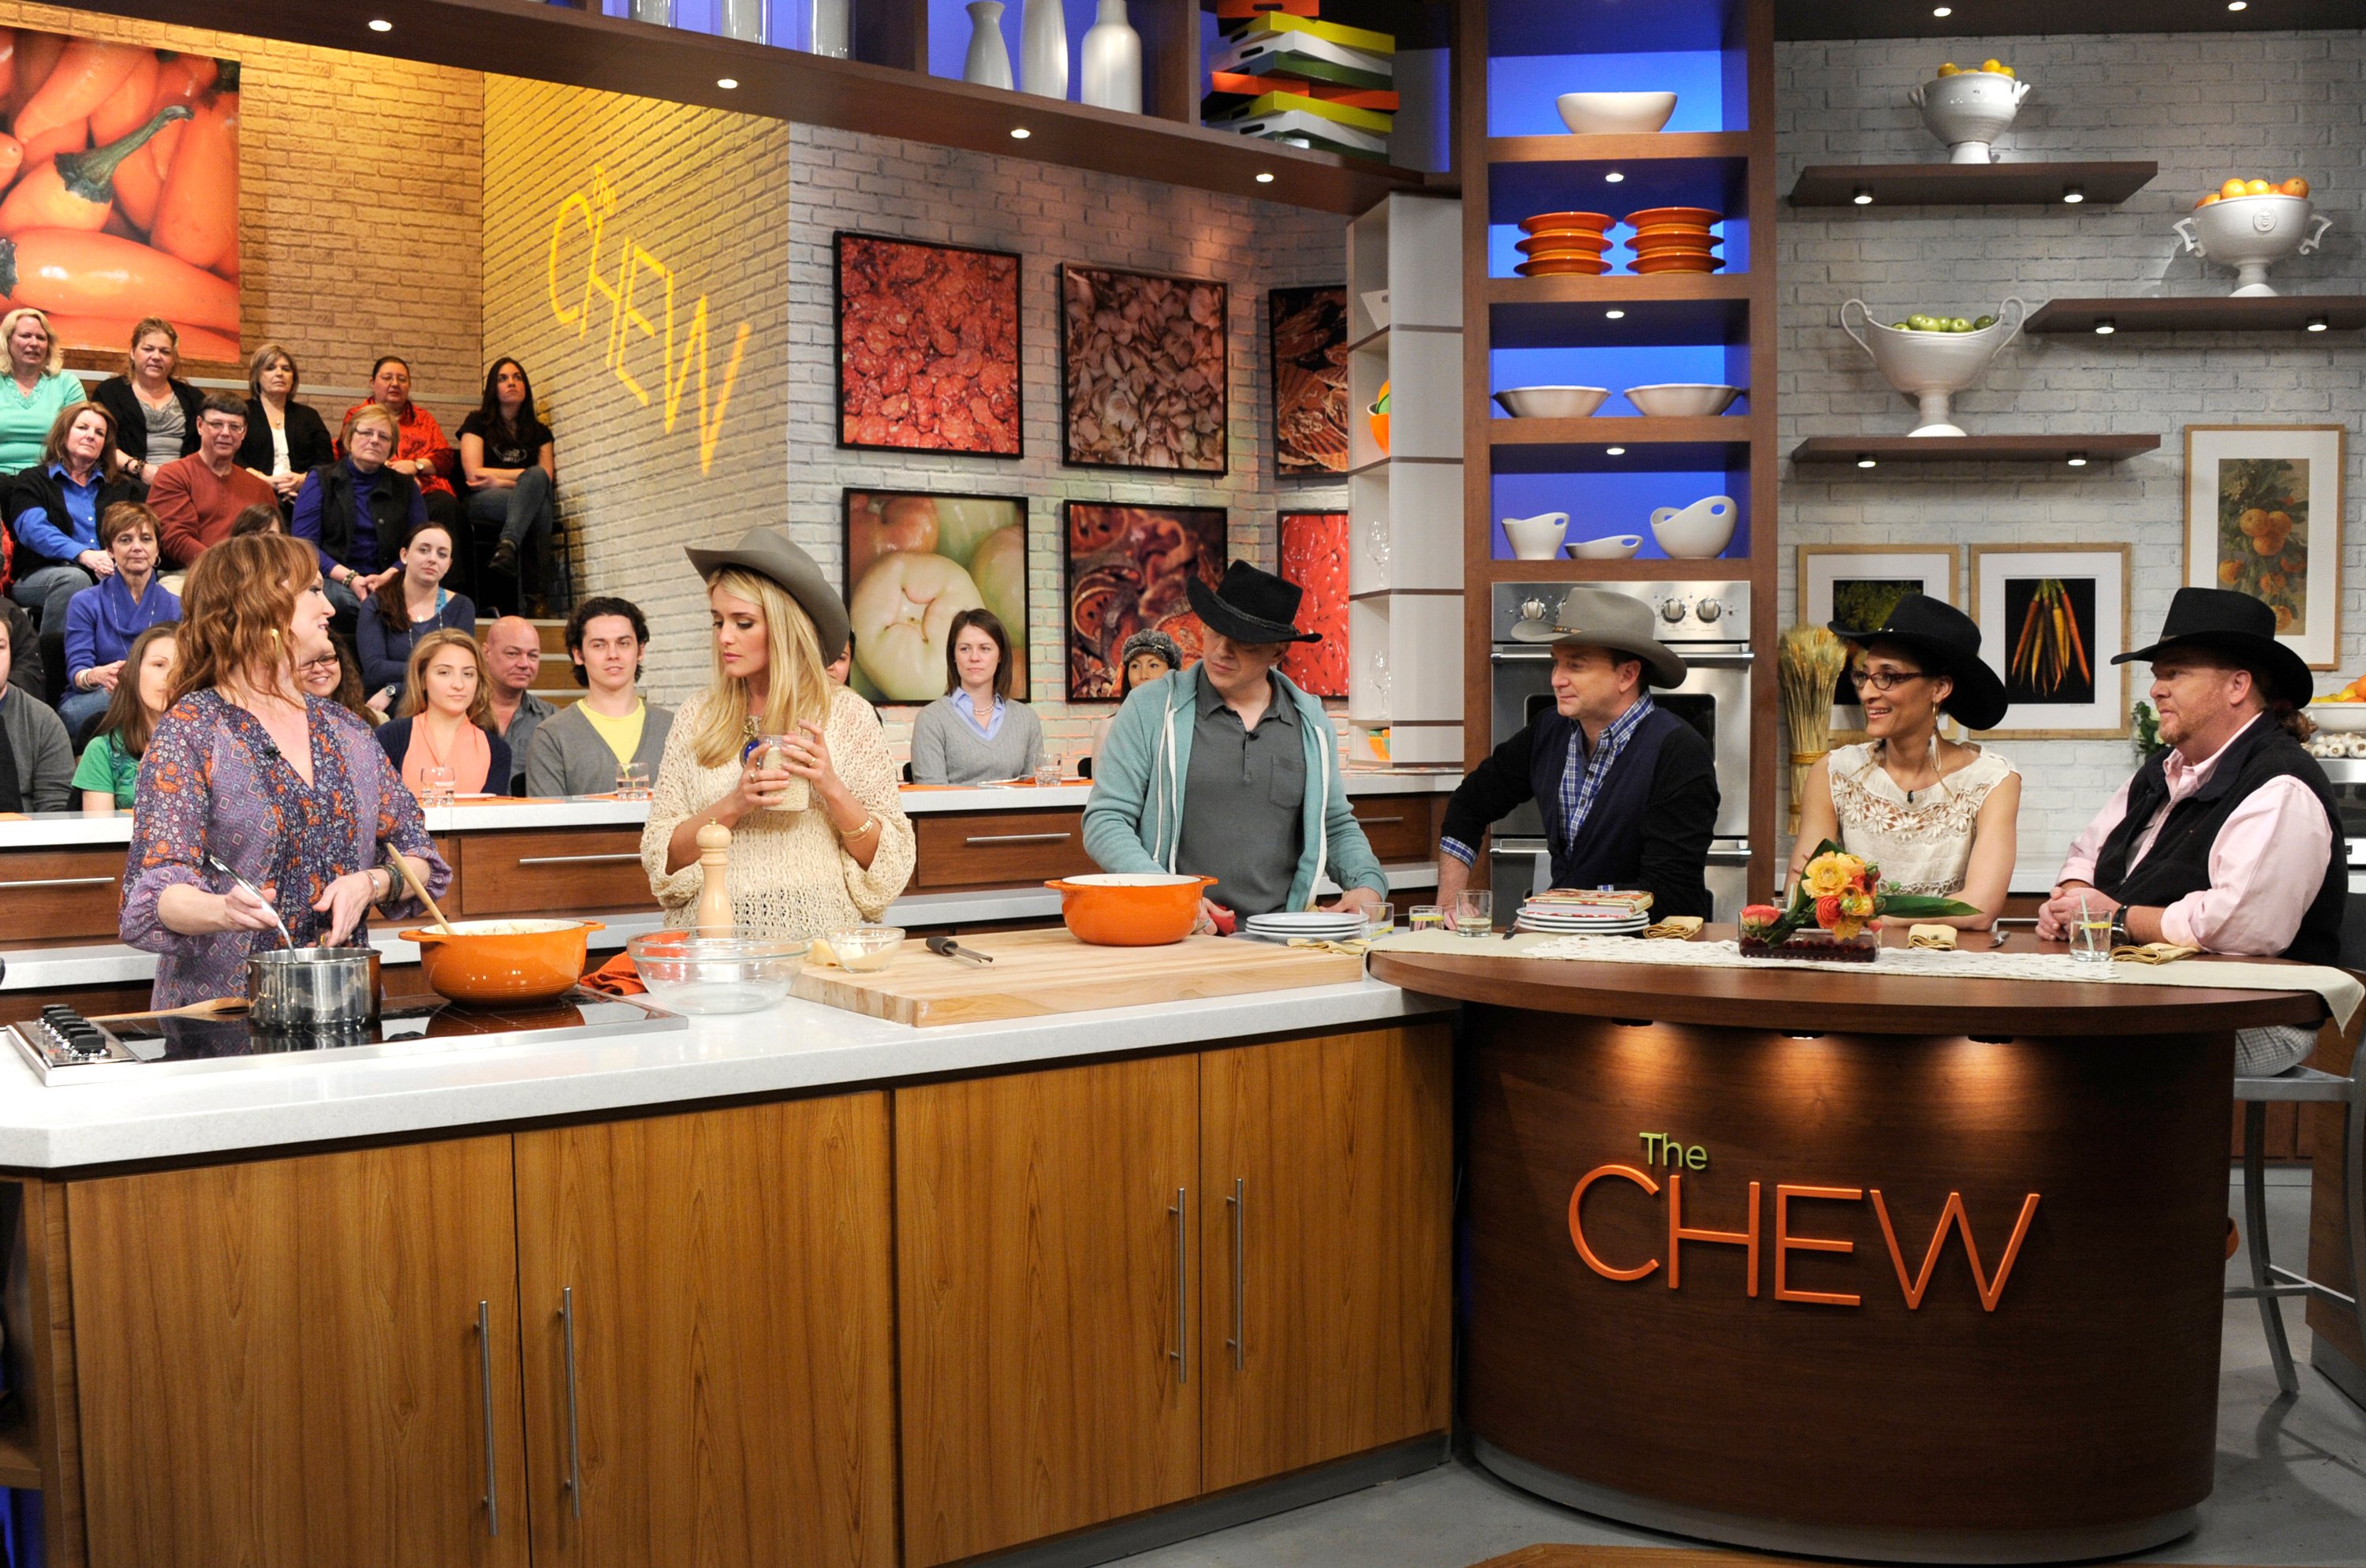 The Pioneer Woman Ree Drummond does a cooking demonstration on The Chew.